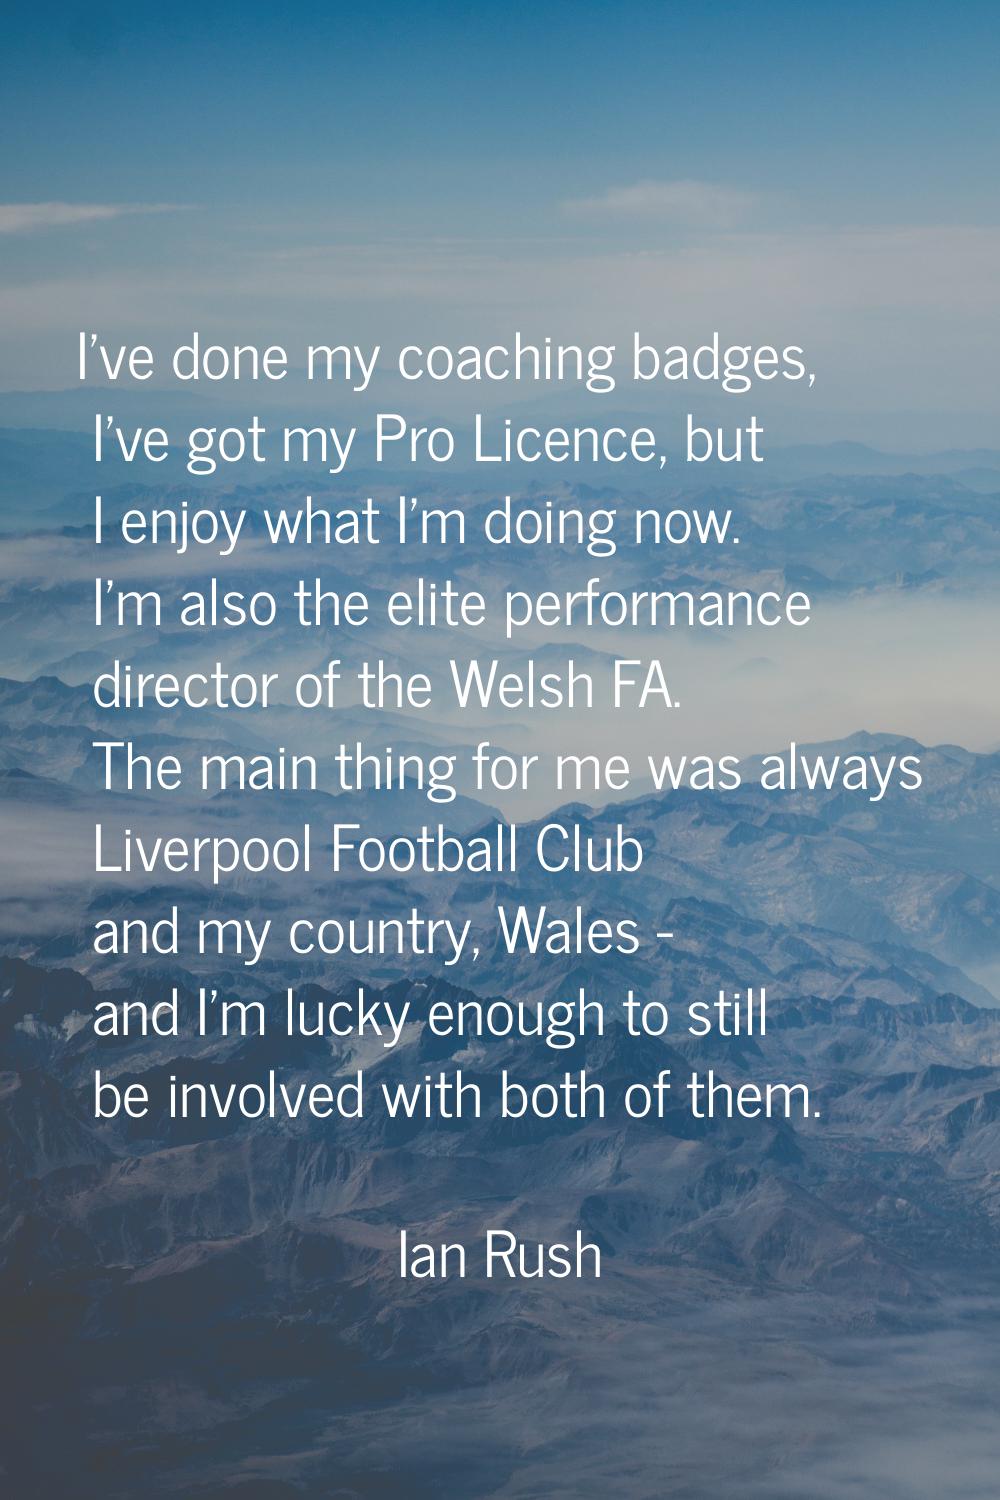 I've done my coaching badges, I've got my Pro Licence, but I enjoy what I'm doing now. I'm also the